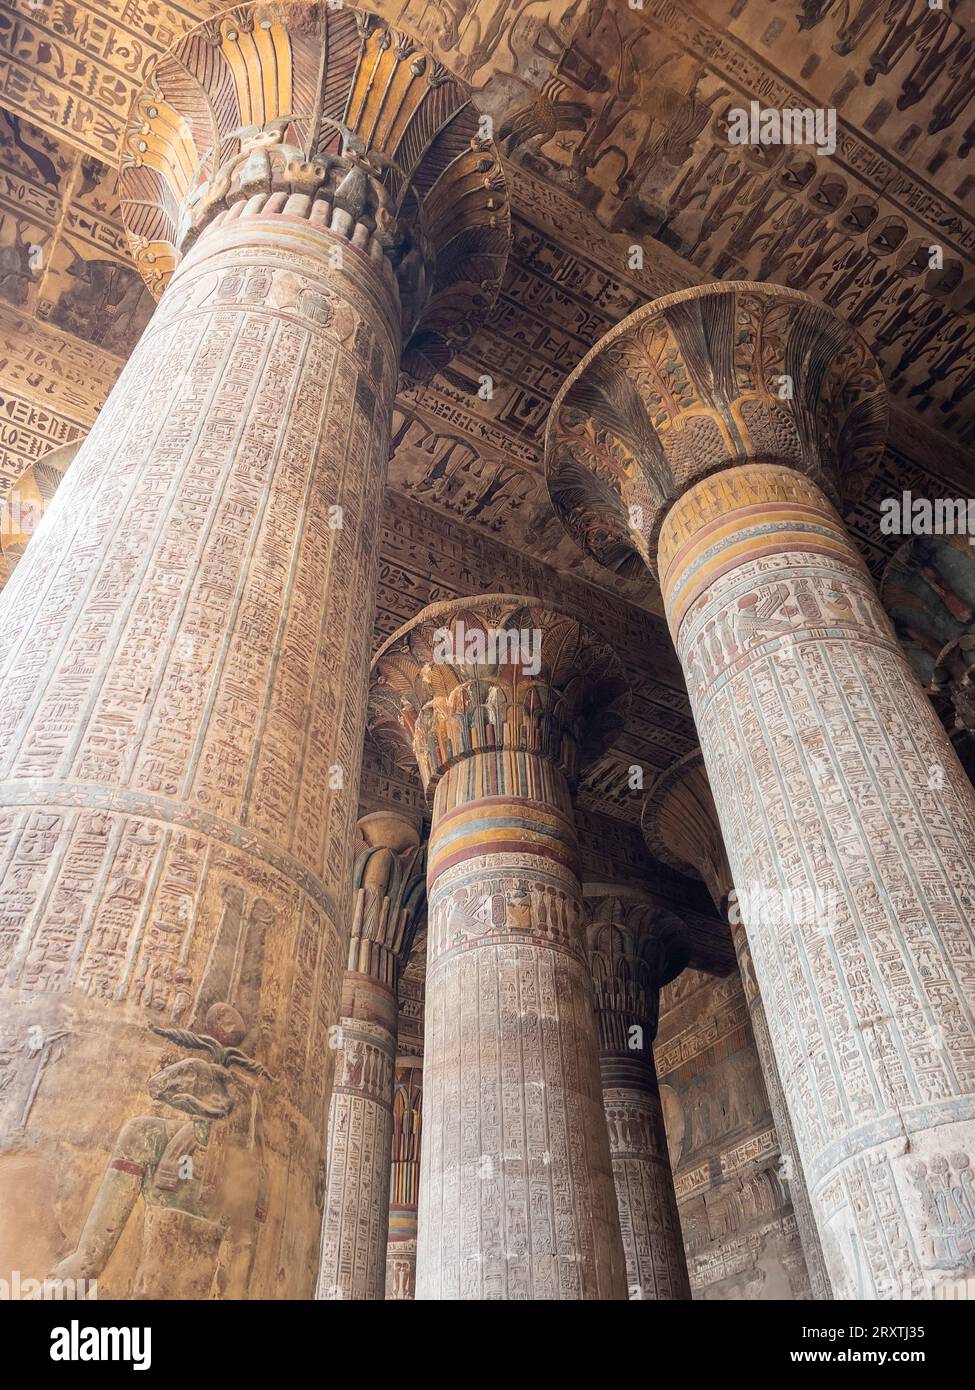 Columns in the Temple of Hathor, which began construction in 54 BCE, part of the Dendera Temple complex, Dendera, Egypt, North Africa, Africa Stock Photo